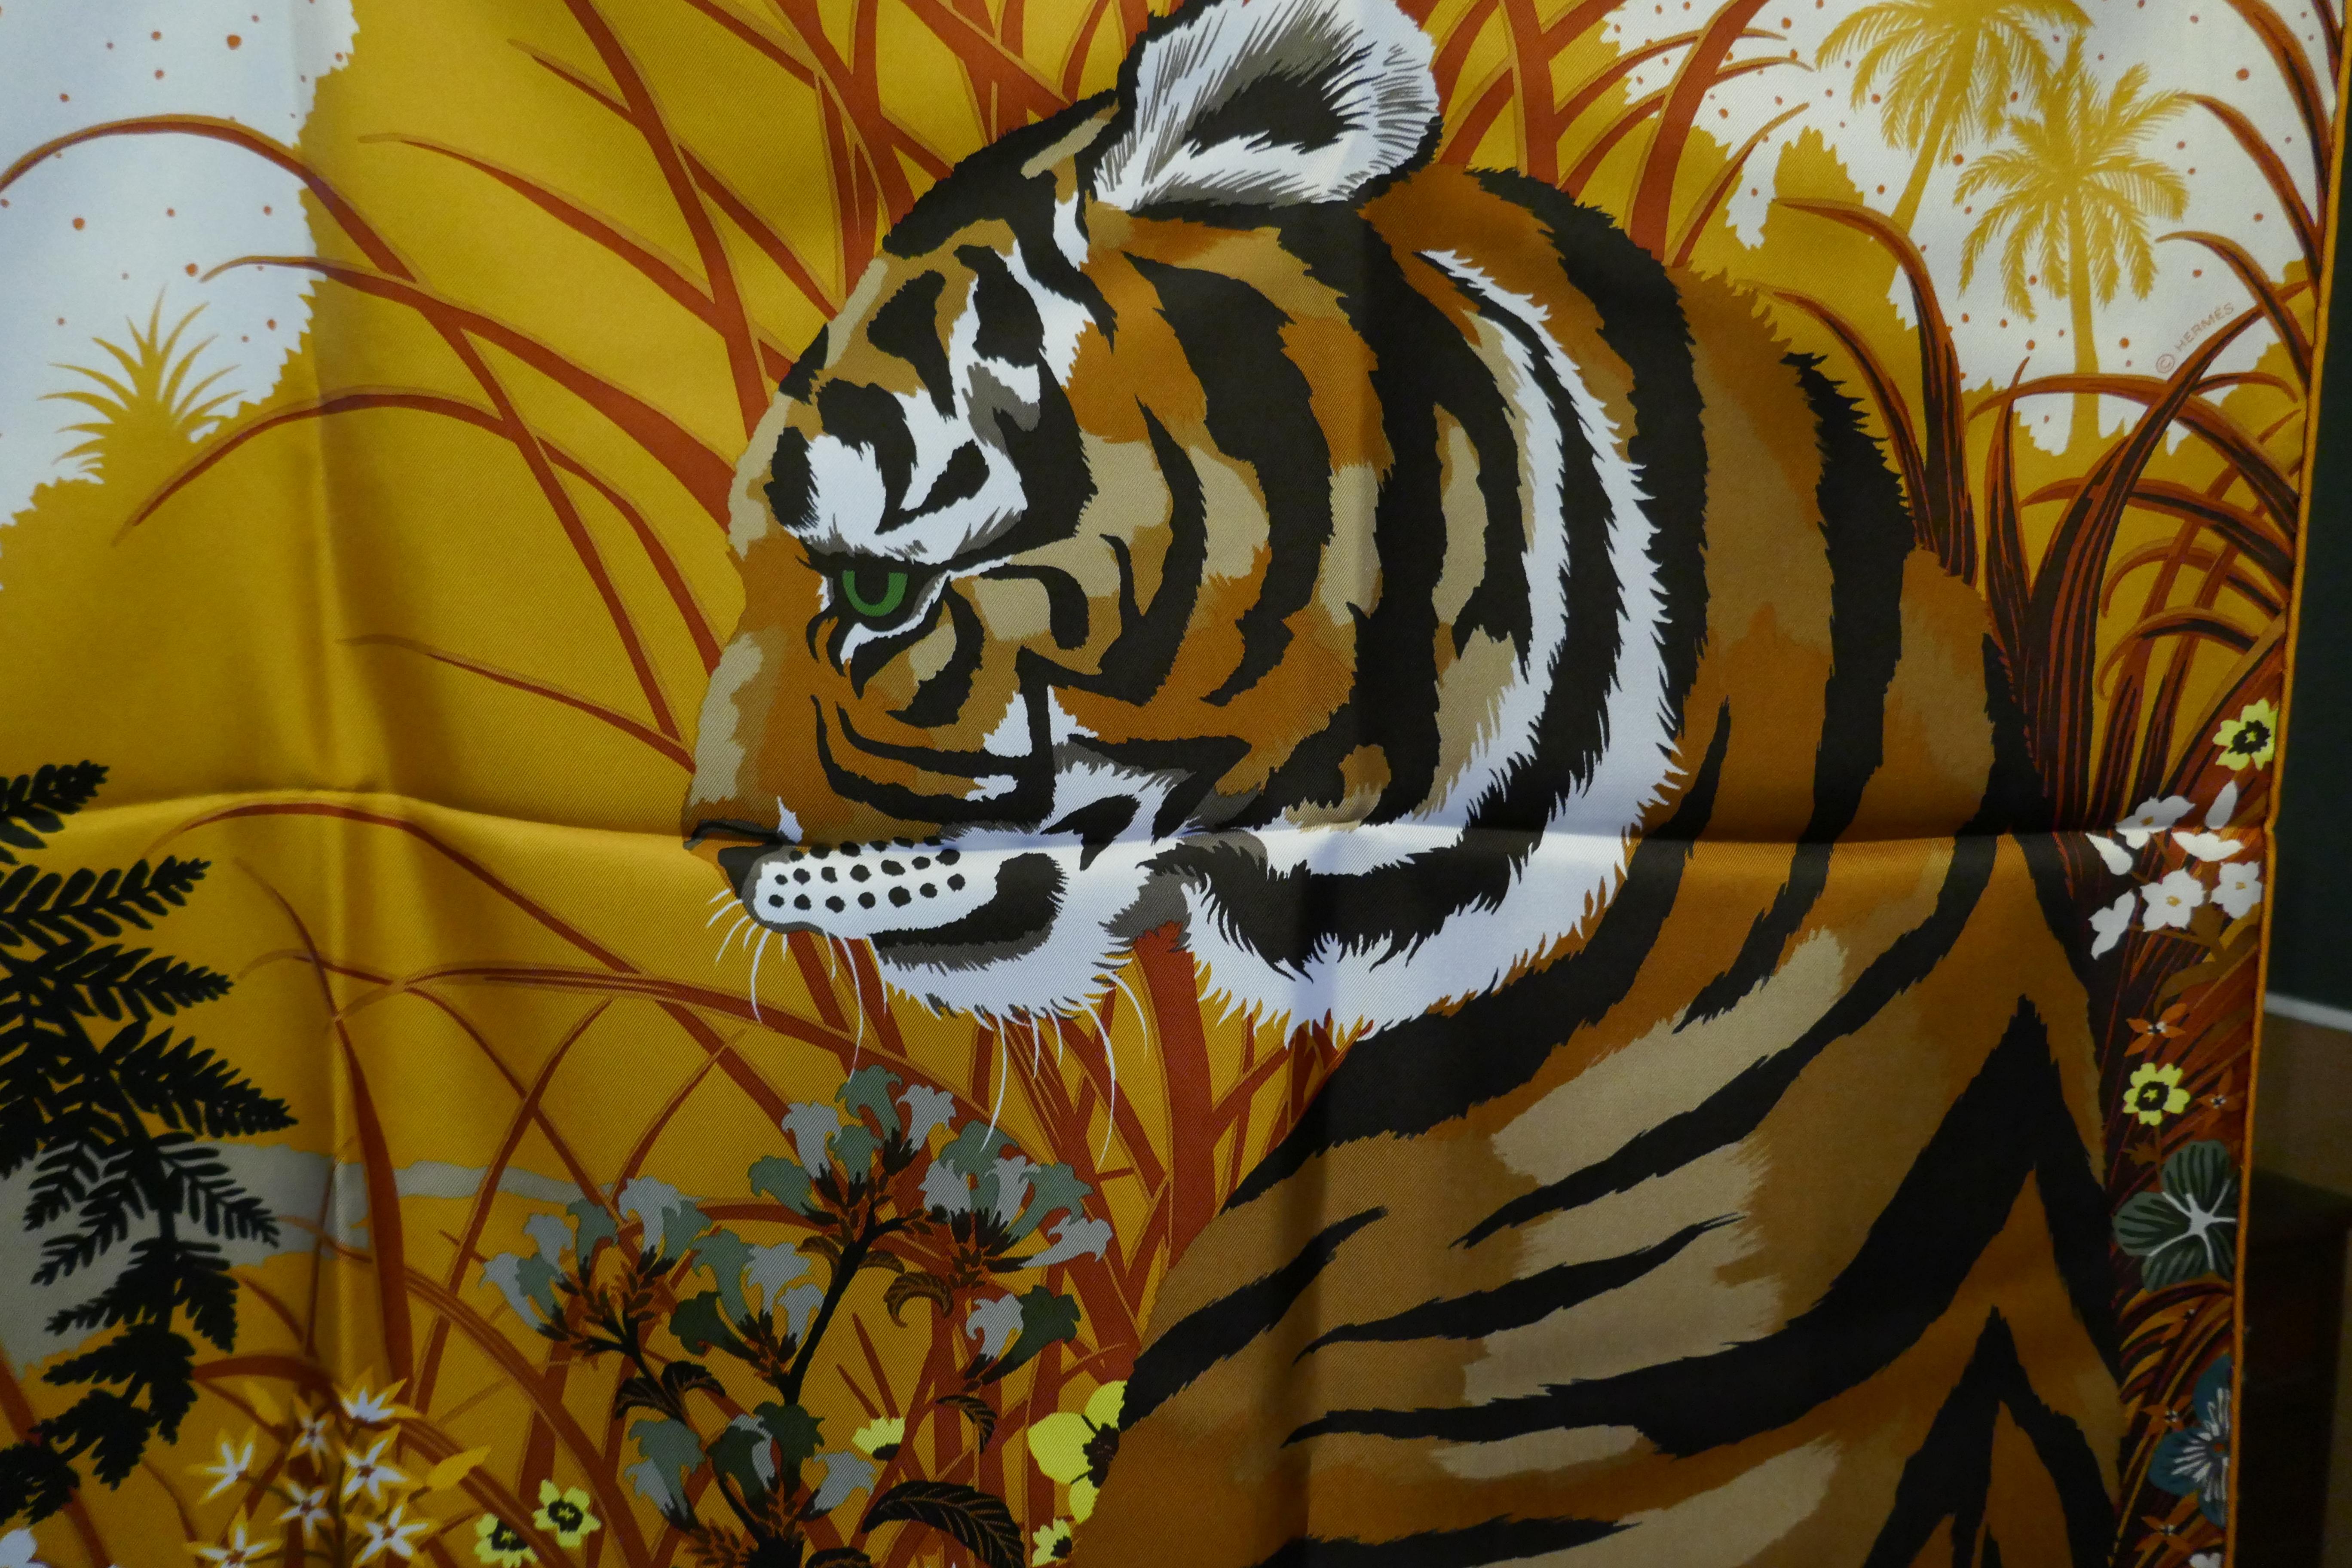 Superb 2015 Hermes Silk Scarf “ Tyger Tyger ” by  Alice Shirley

Authentic un worn original Hermes Silk Scarf, in a warm Brown and Gold Pallet
This is an exquisite and well loved design, this scarf is from 2015
Un used, as new and safely stored away